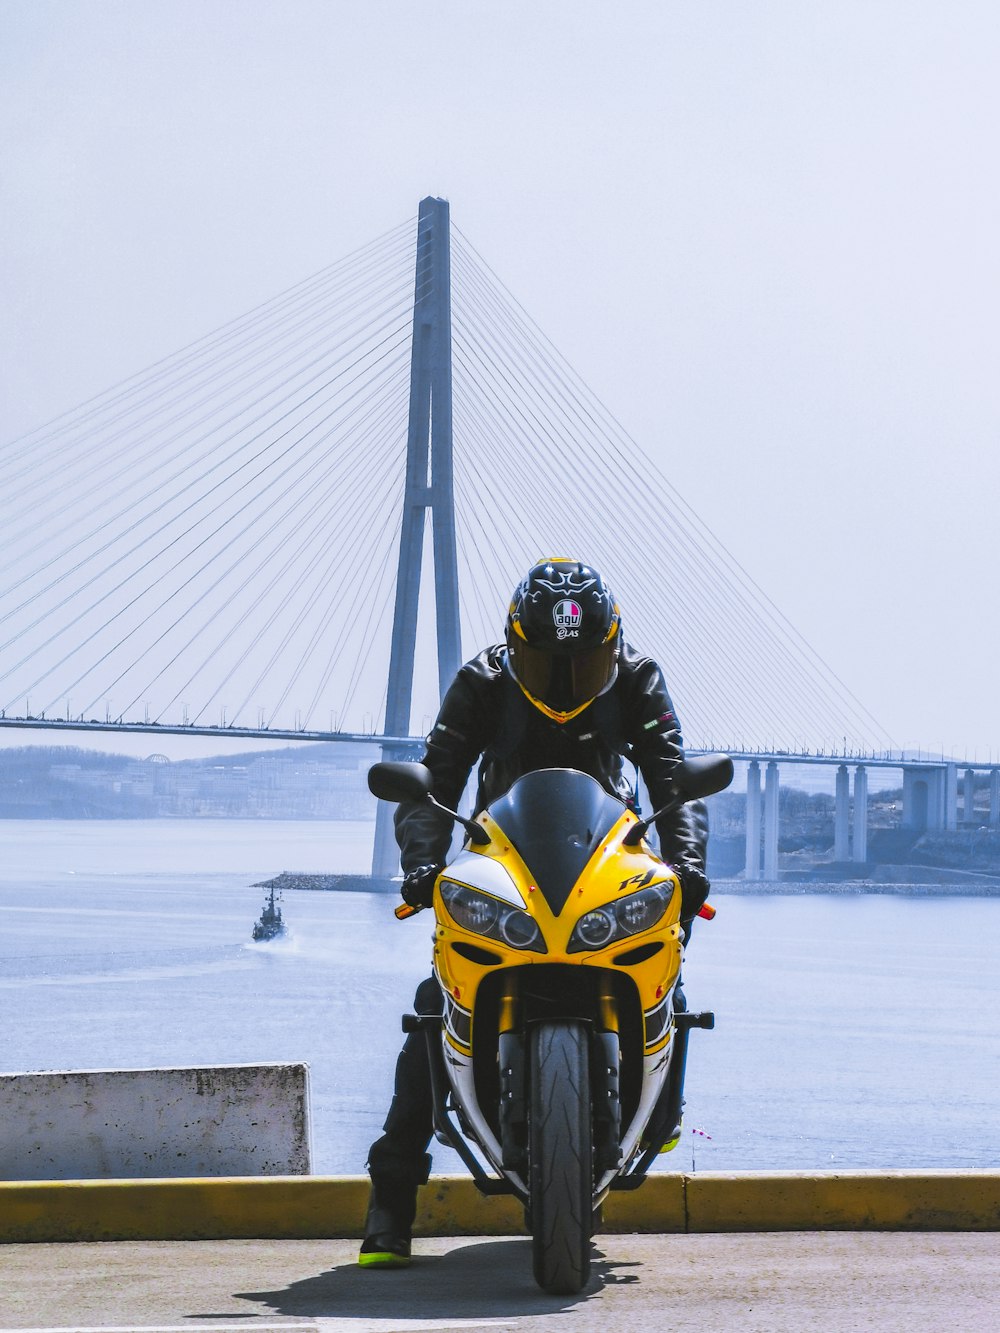 yellow and black sports bike on snow covered ground during daytime